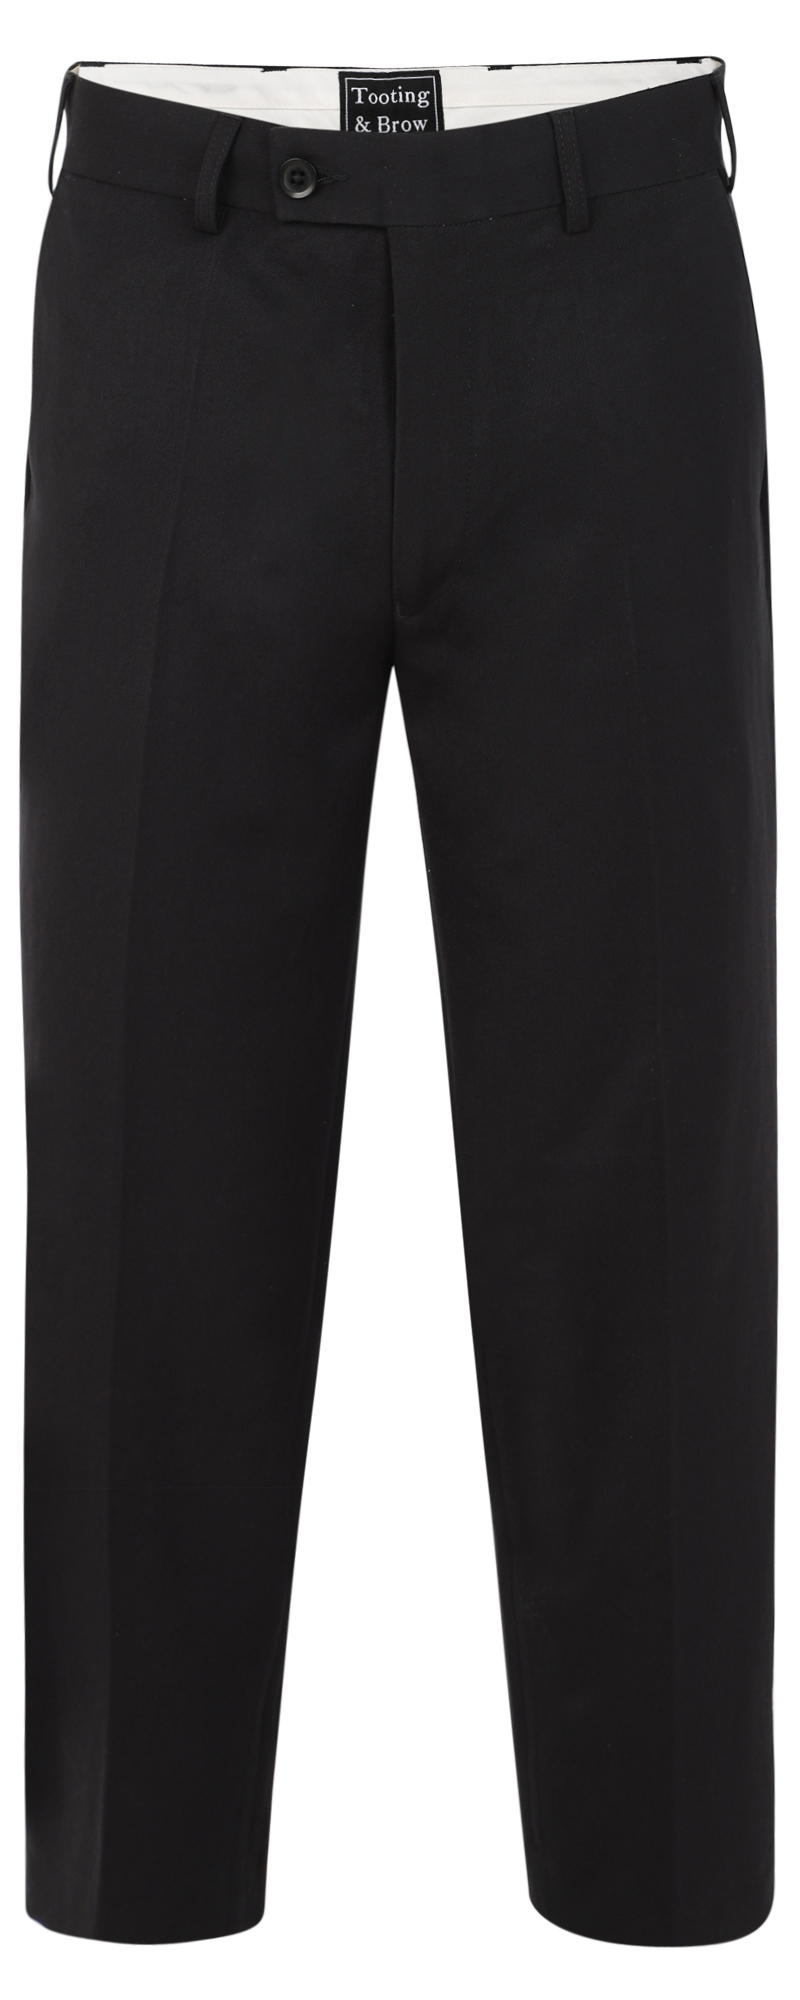 Plus Size Formal Trousers For Men Online  Big Size Mens Formal Trousers  India